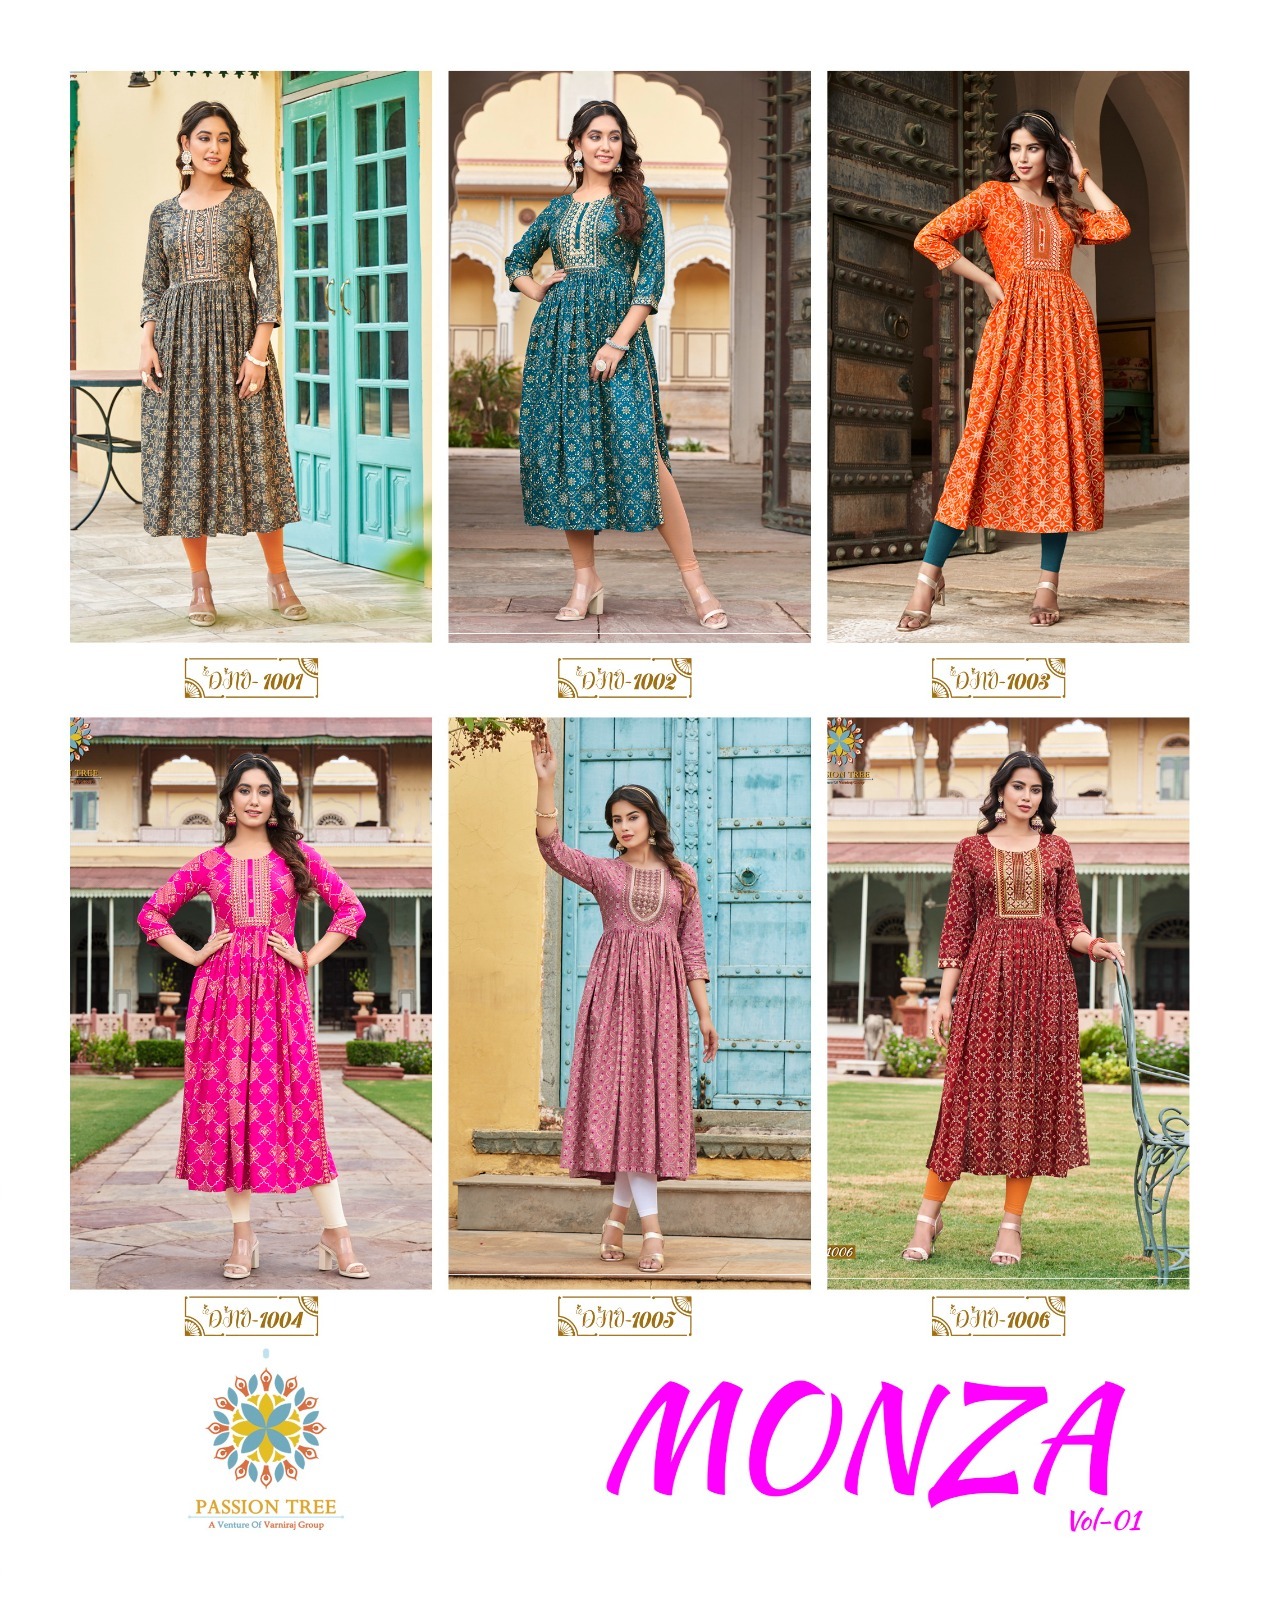 Passion Tree Monza Vol 1 collection 1